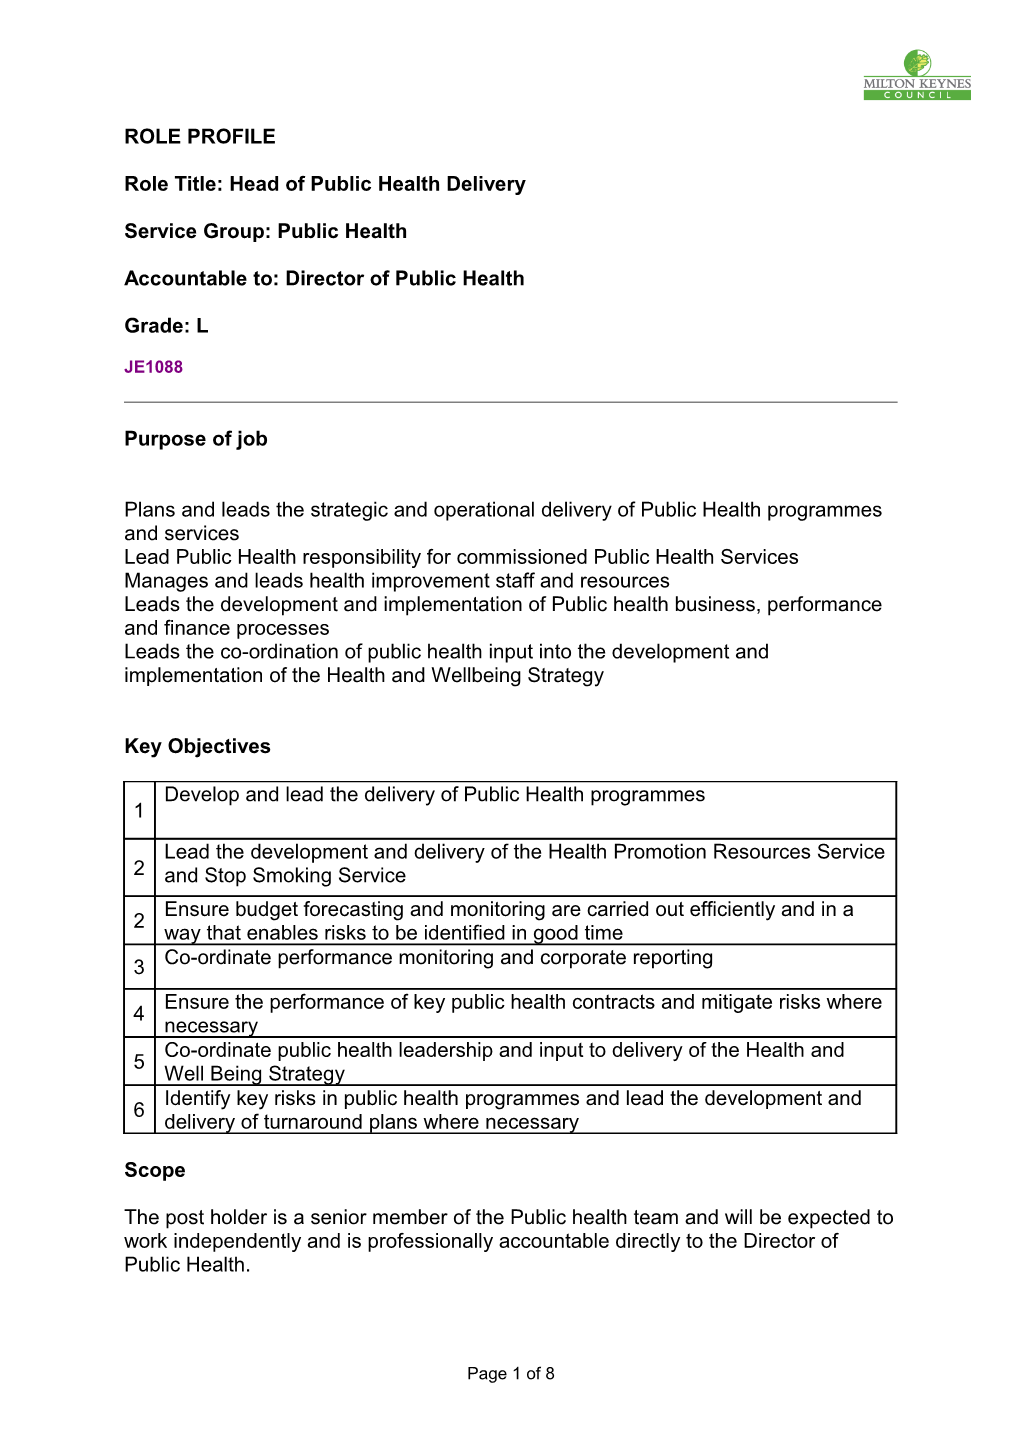 Role Title: Head of Public Health Delivery